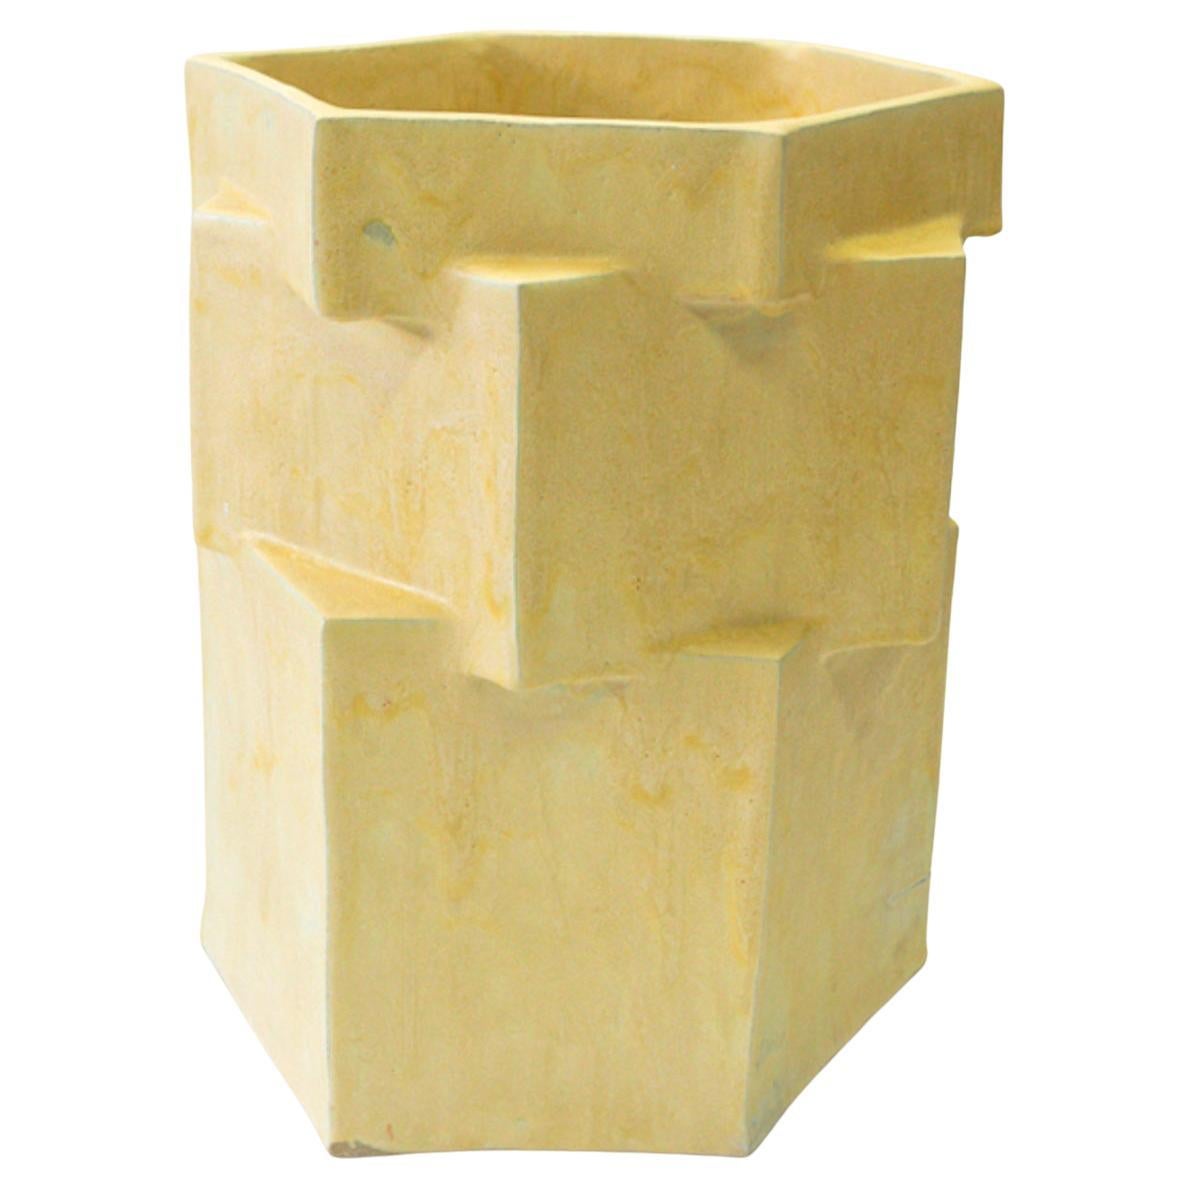 Three-Tier Ceramic Hex Planter in Buttery Yellow by Bzippy